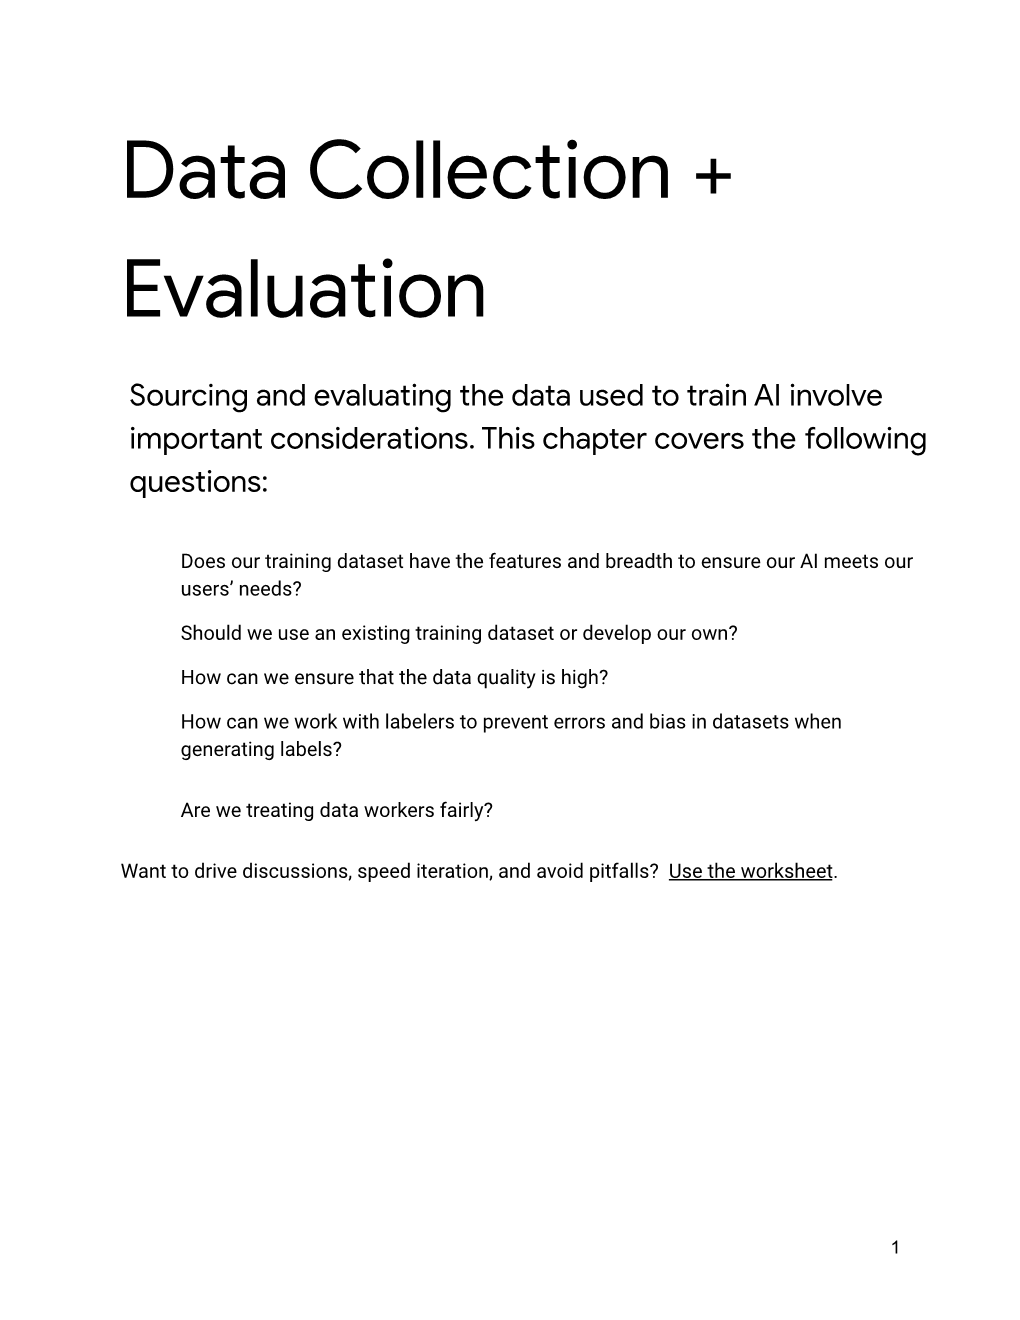 Data Collection + Evaluation